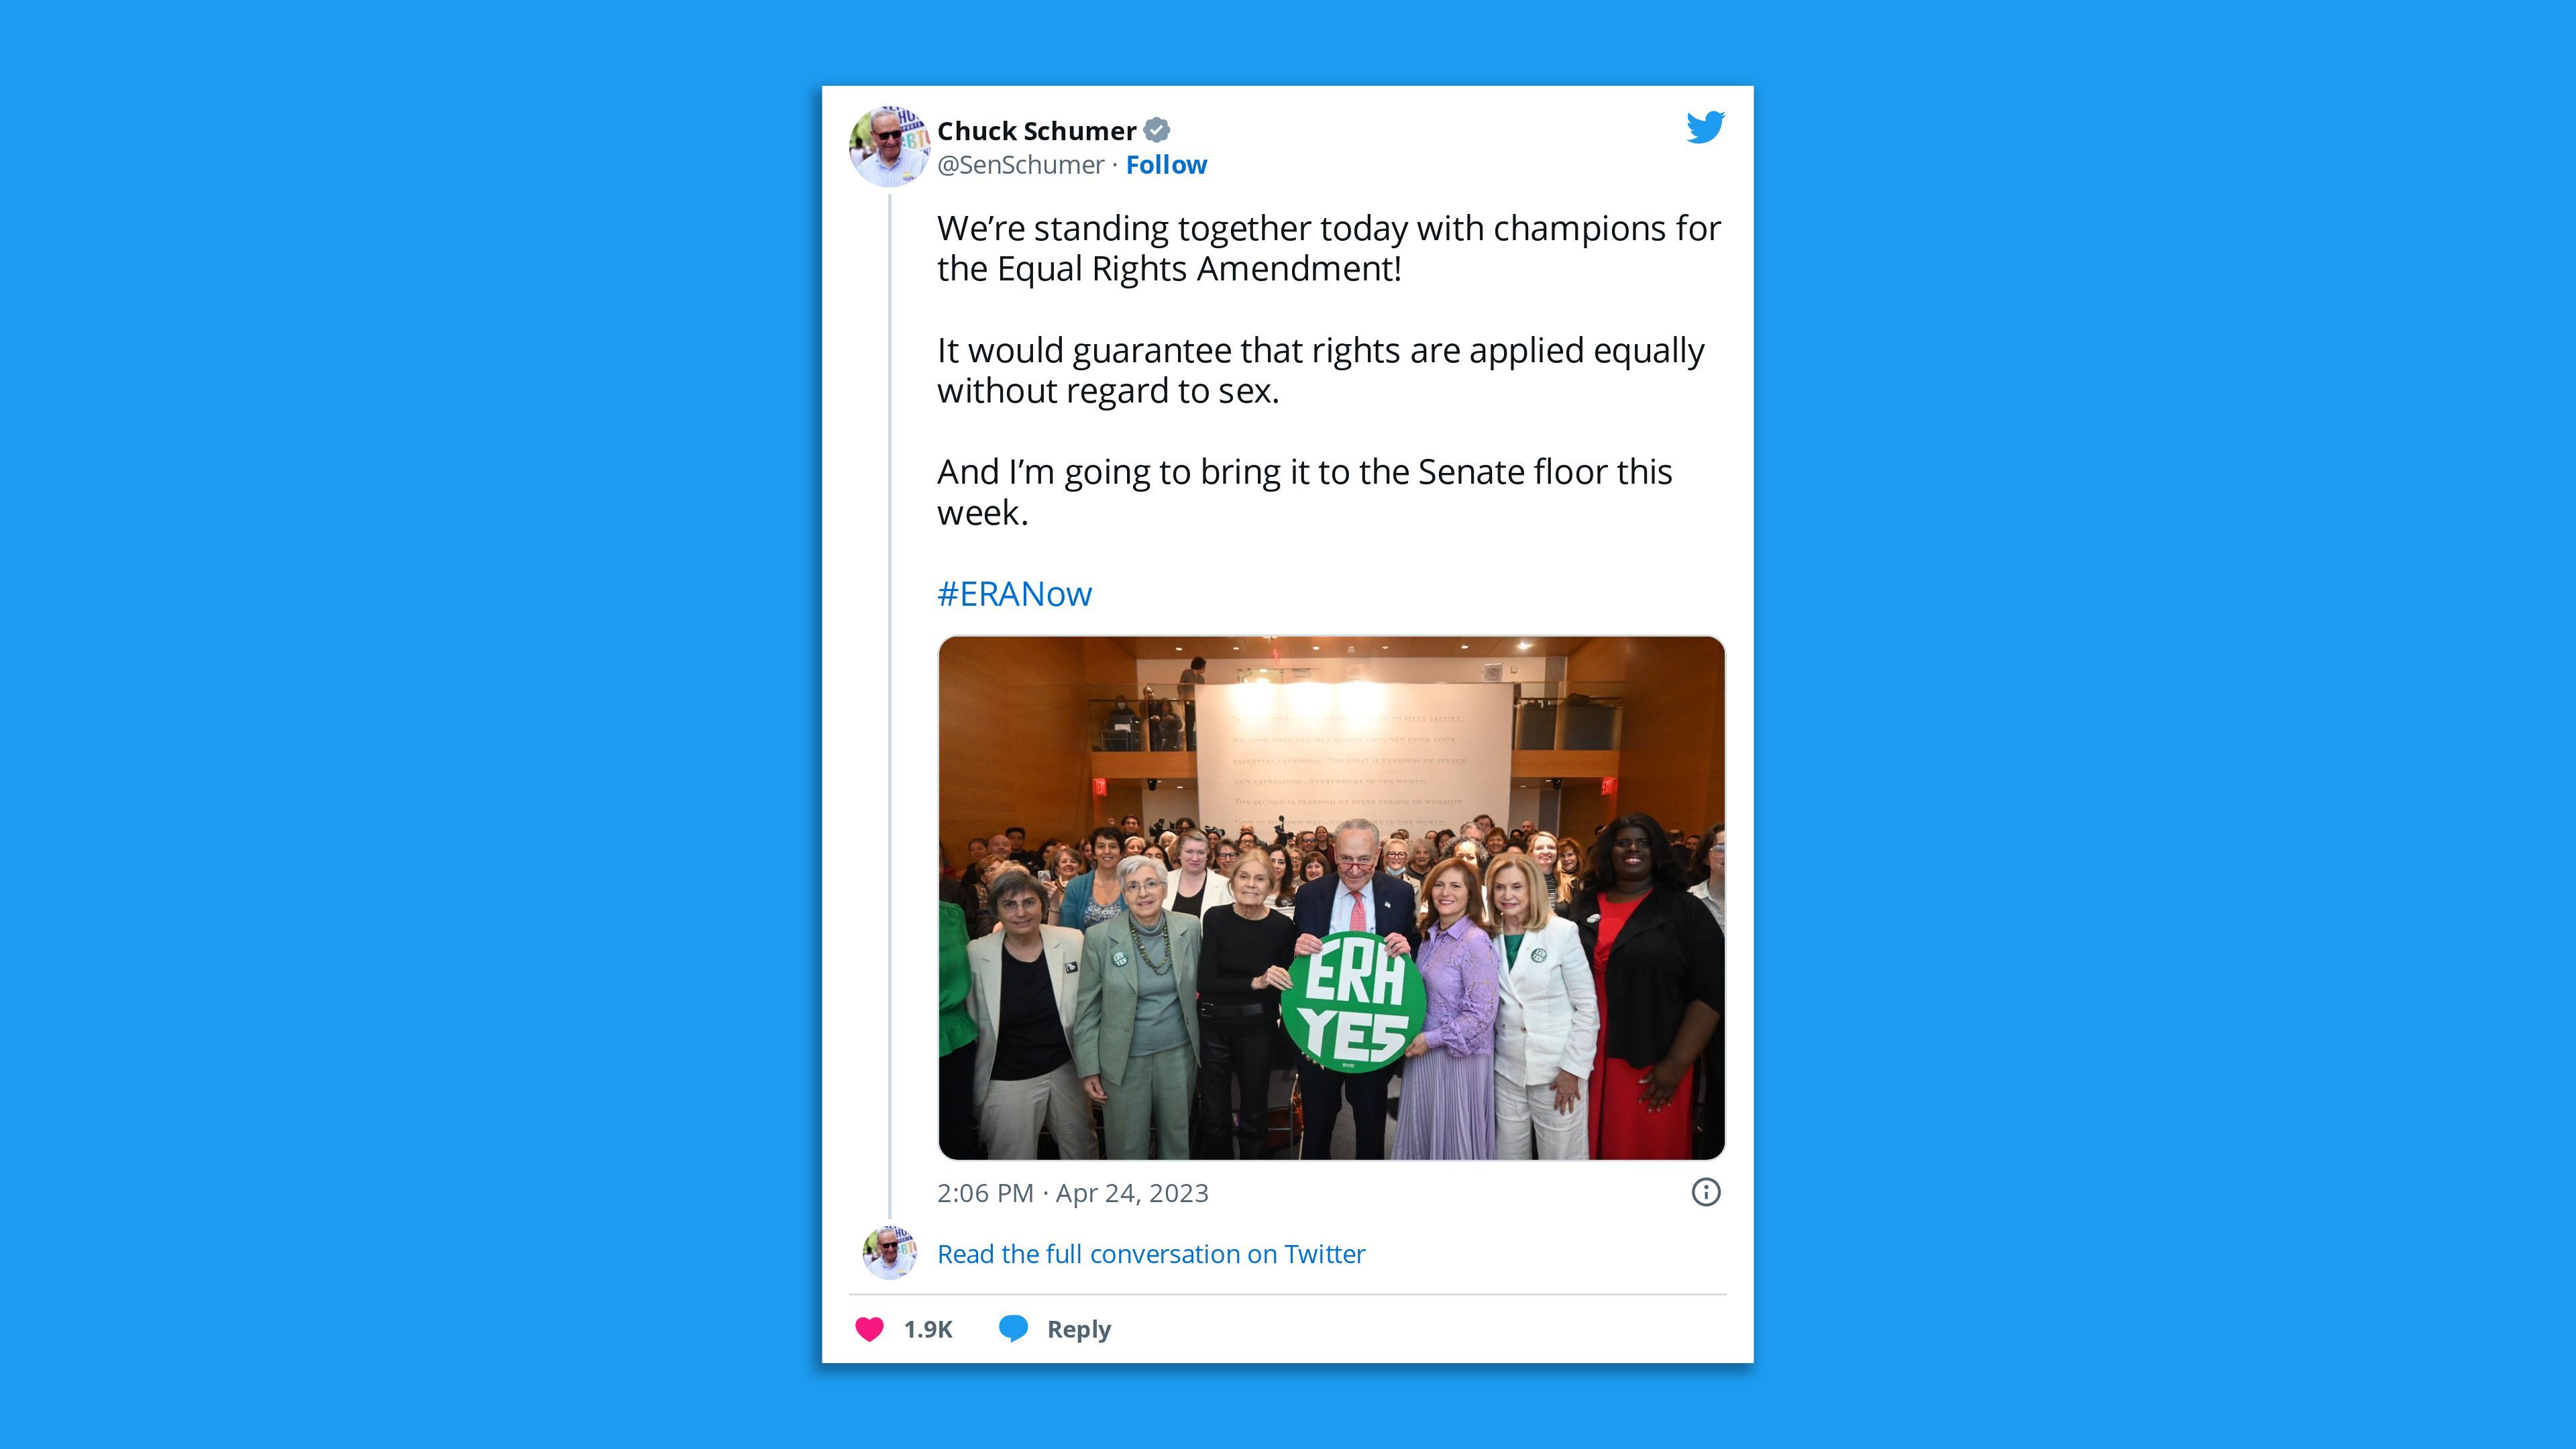 A Twitter photo of Sen. Chuck Schumer holding a sign saying "ERA Yes," with his accompanying tweet comment "We’re standing together today with champions for the Equal Rights Amendment!  It would guarantee that rights are applied equally without regard to sex.  And I’m going to bring it to the Senate floor this week."